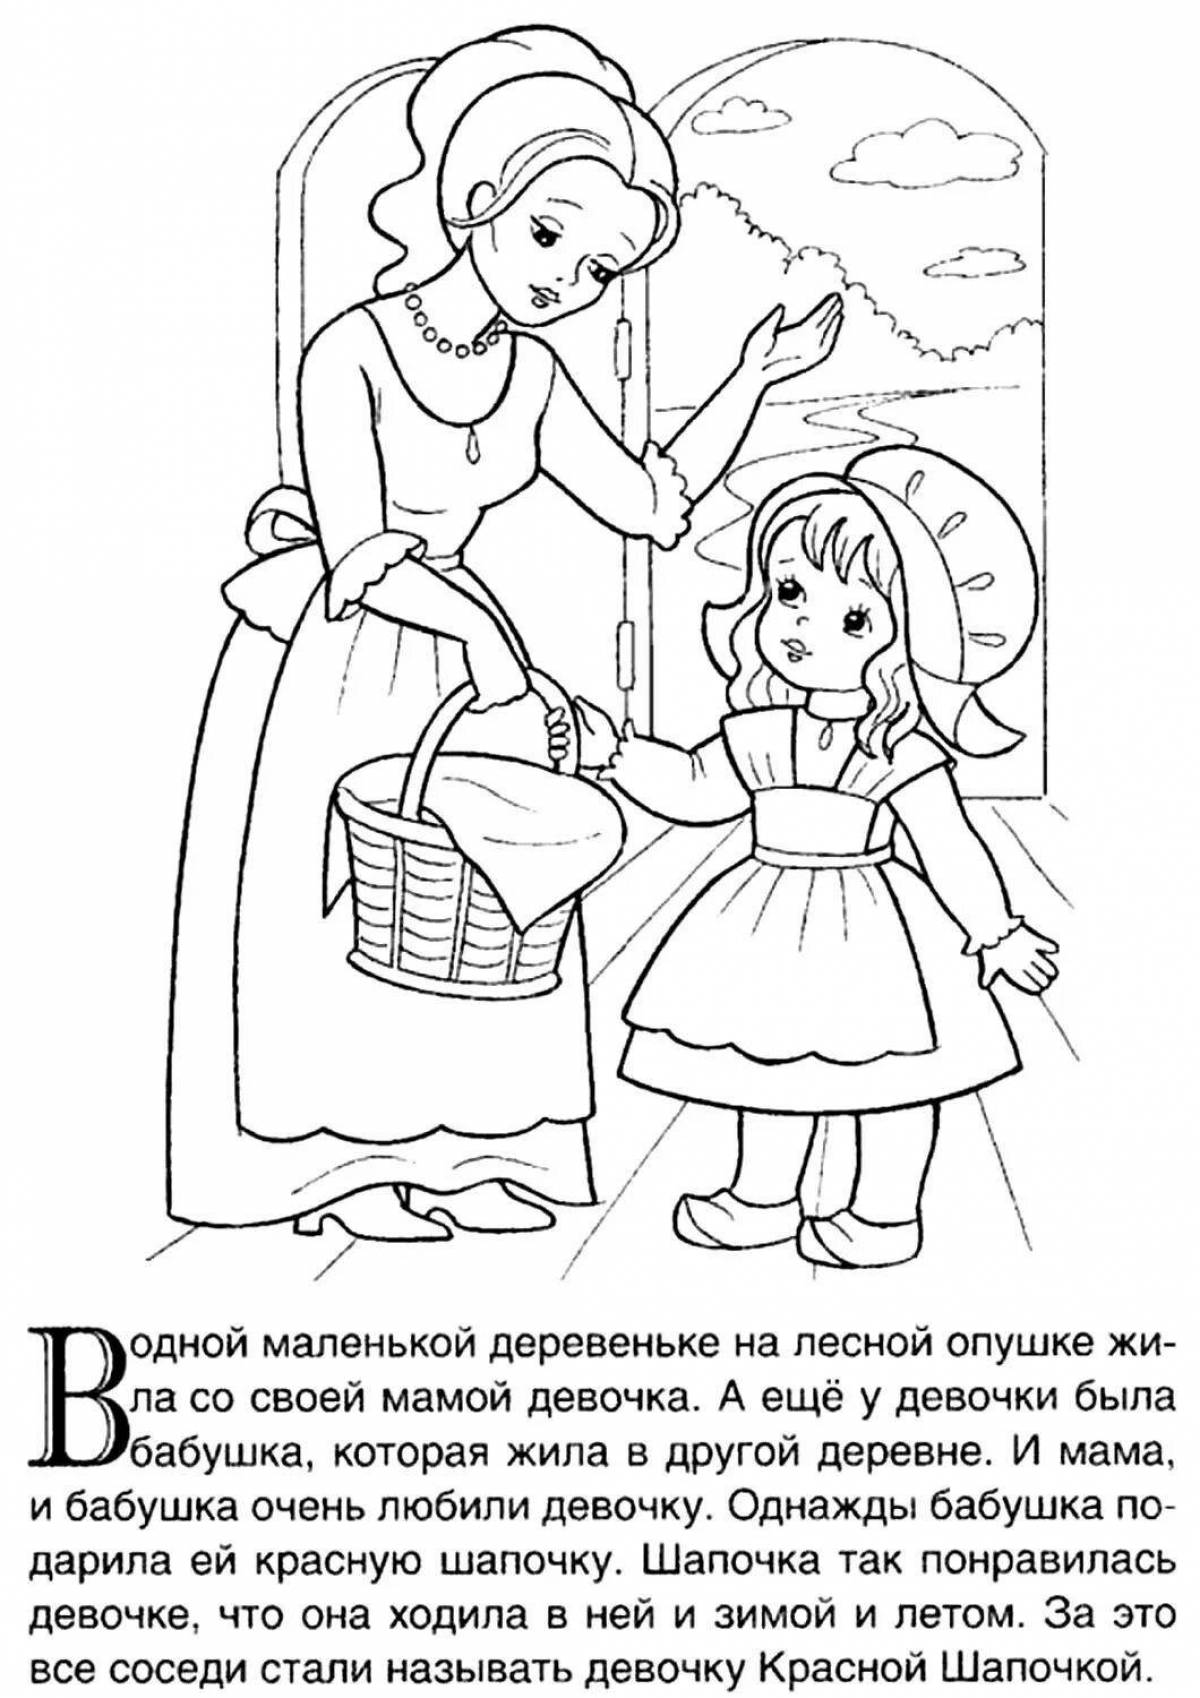 Cute little red riding hood coloring book